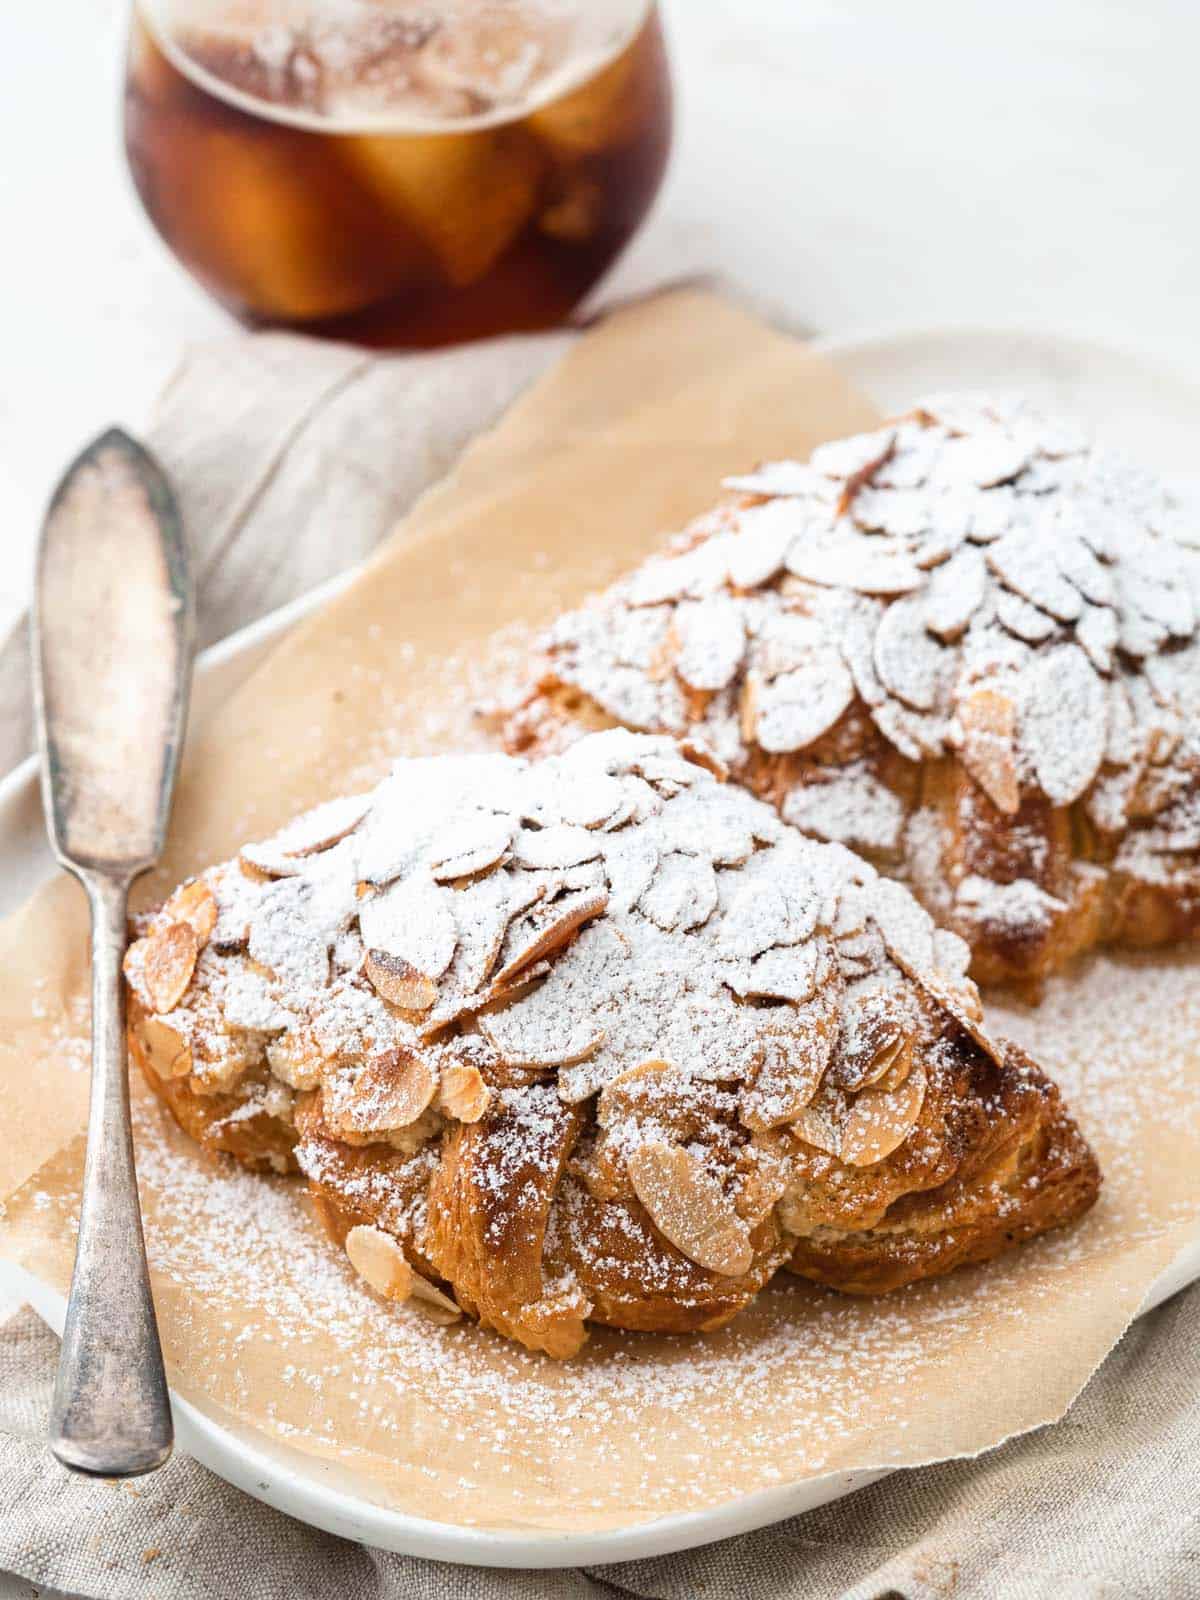 Small batch almond croissants dusted in icing sugar